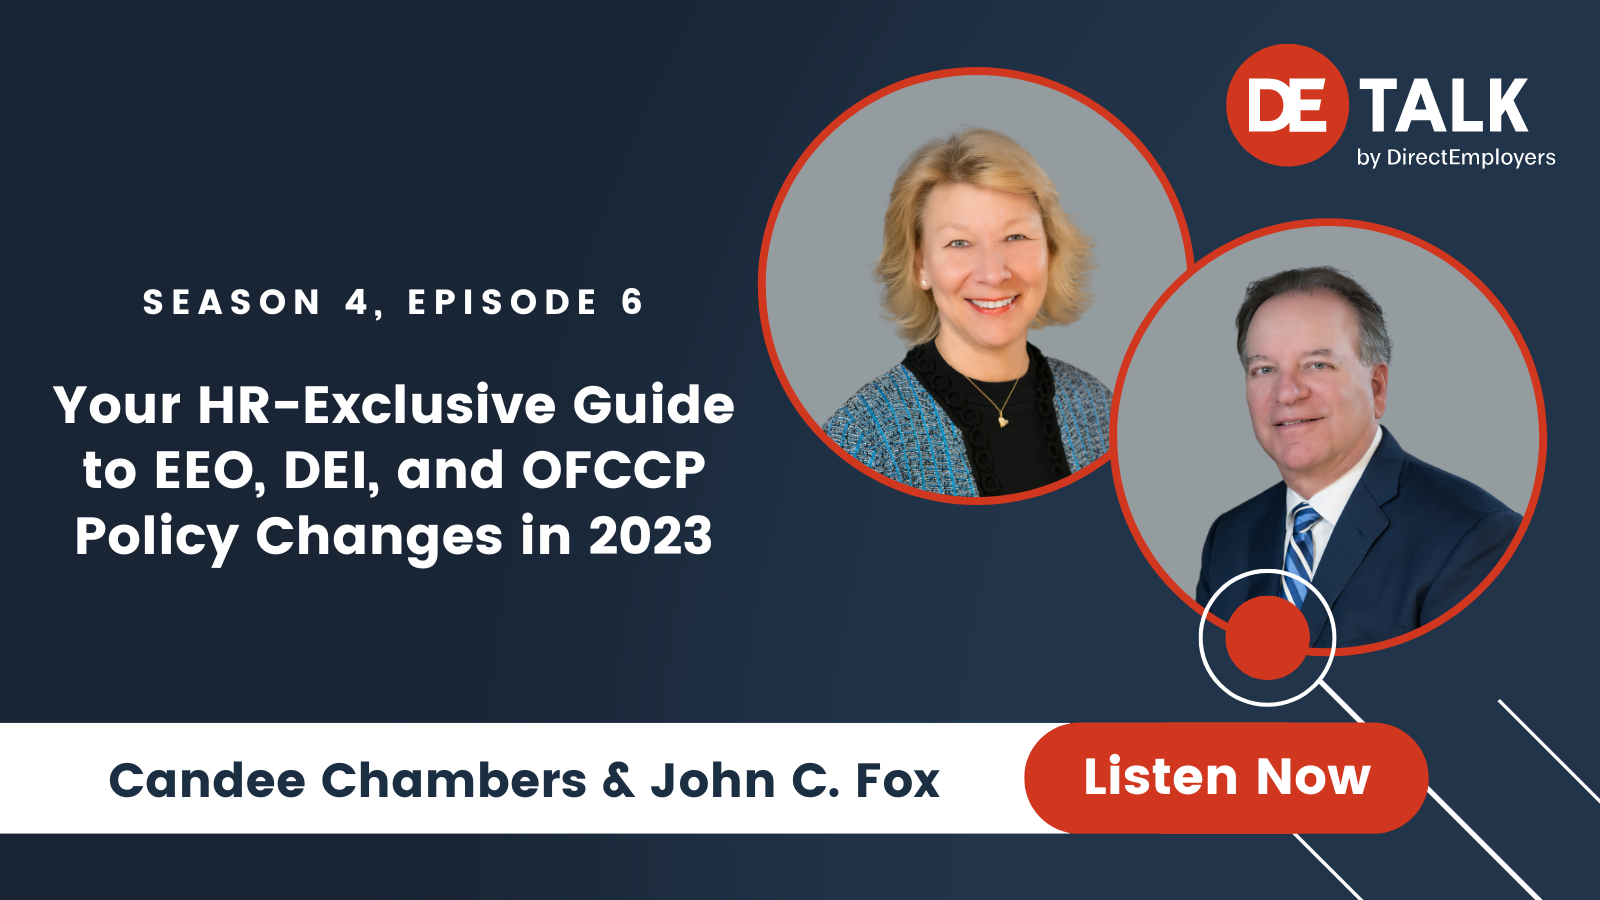 DE Talk S4 E6 with Candee Chambers & John C. Fox: Your HR-Exclusive Guide to EEO, DEI, and OFCCP Policy Changes in 2023